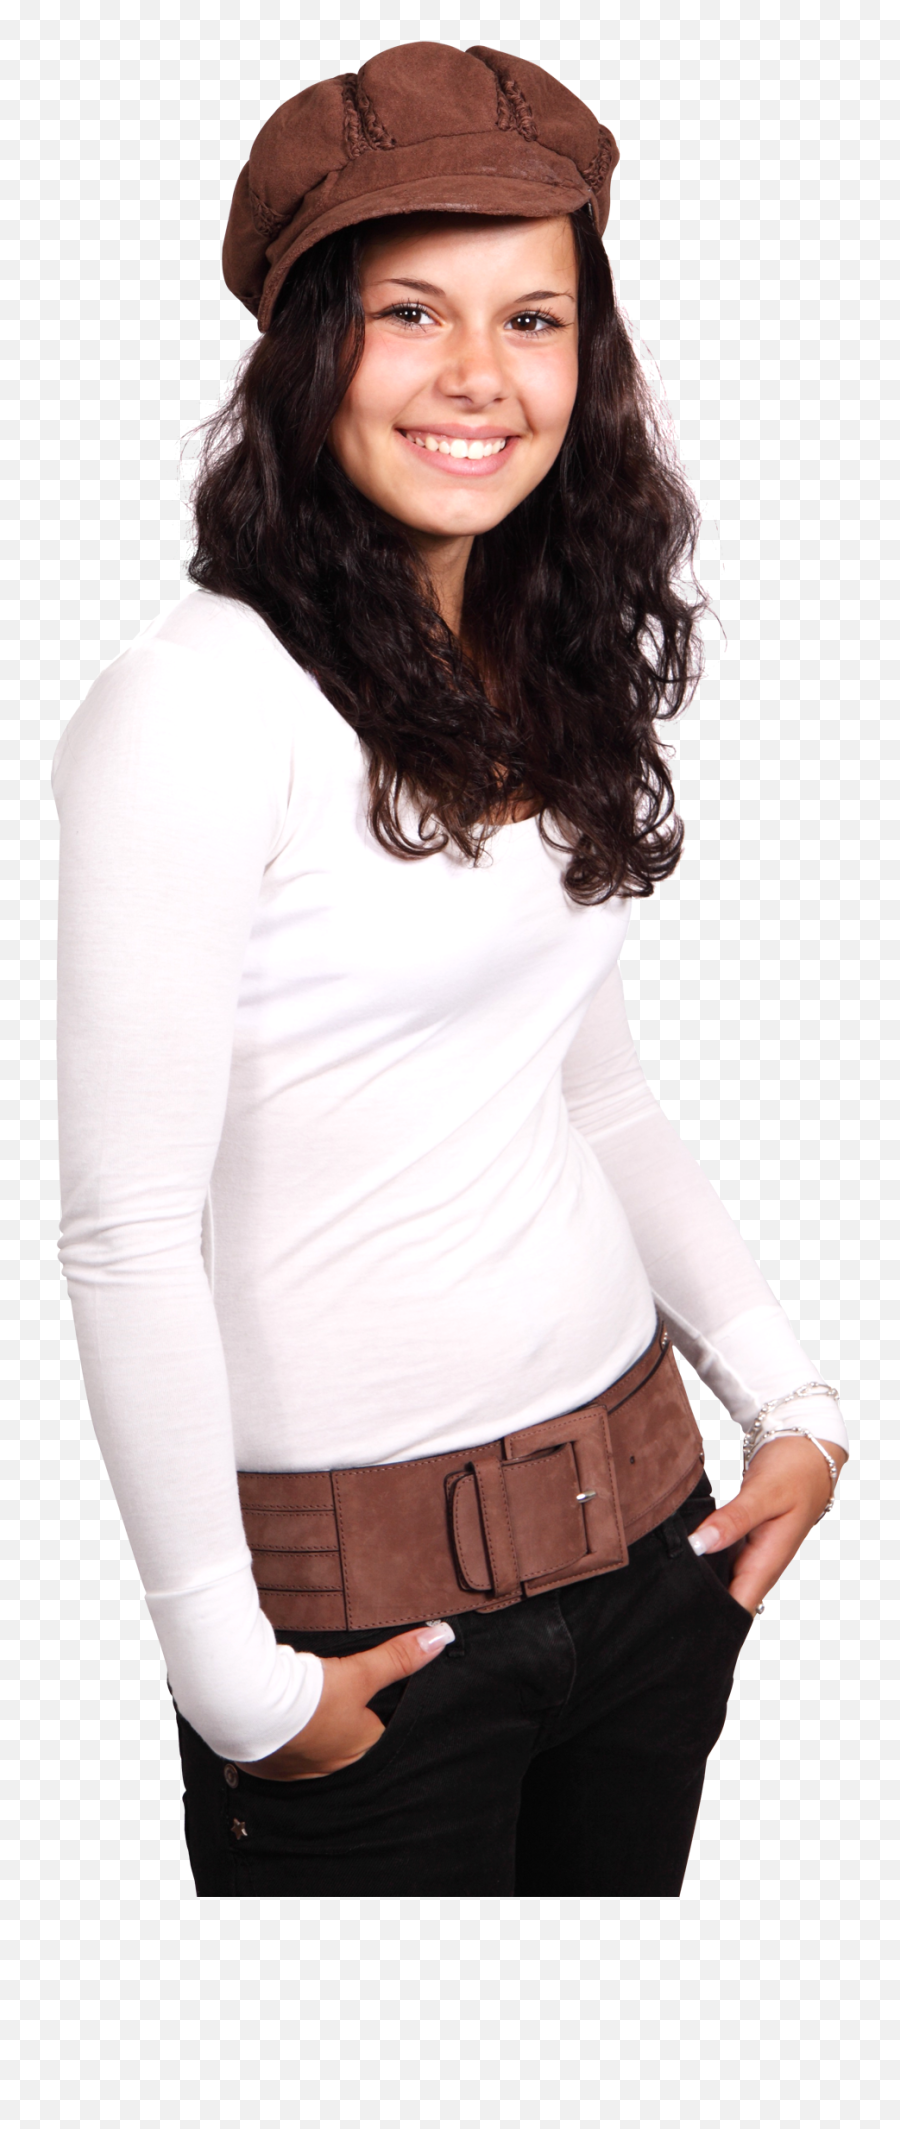 Young Smiling Woman With Brown Cap Png Image - Pngpix,White T Shirt Png